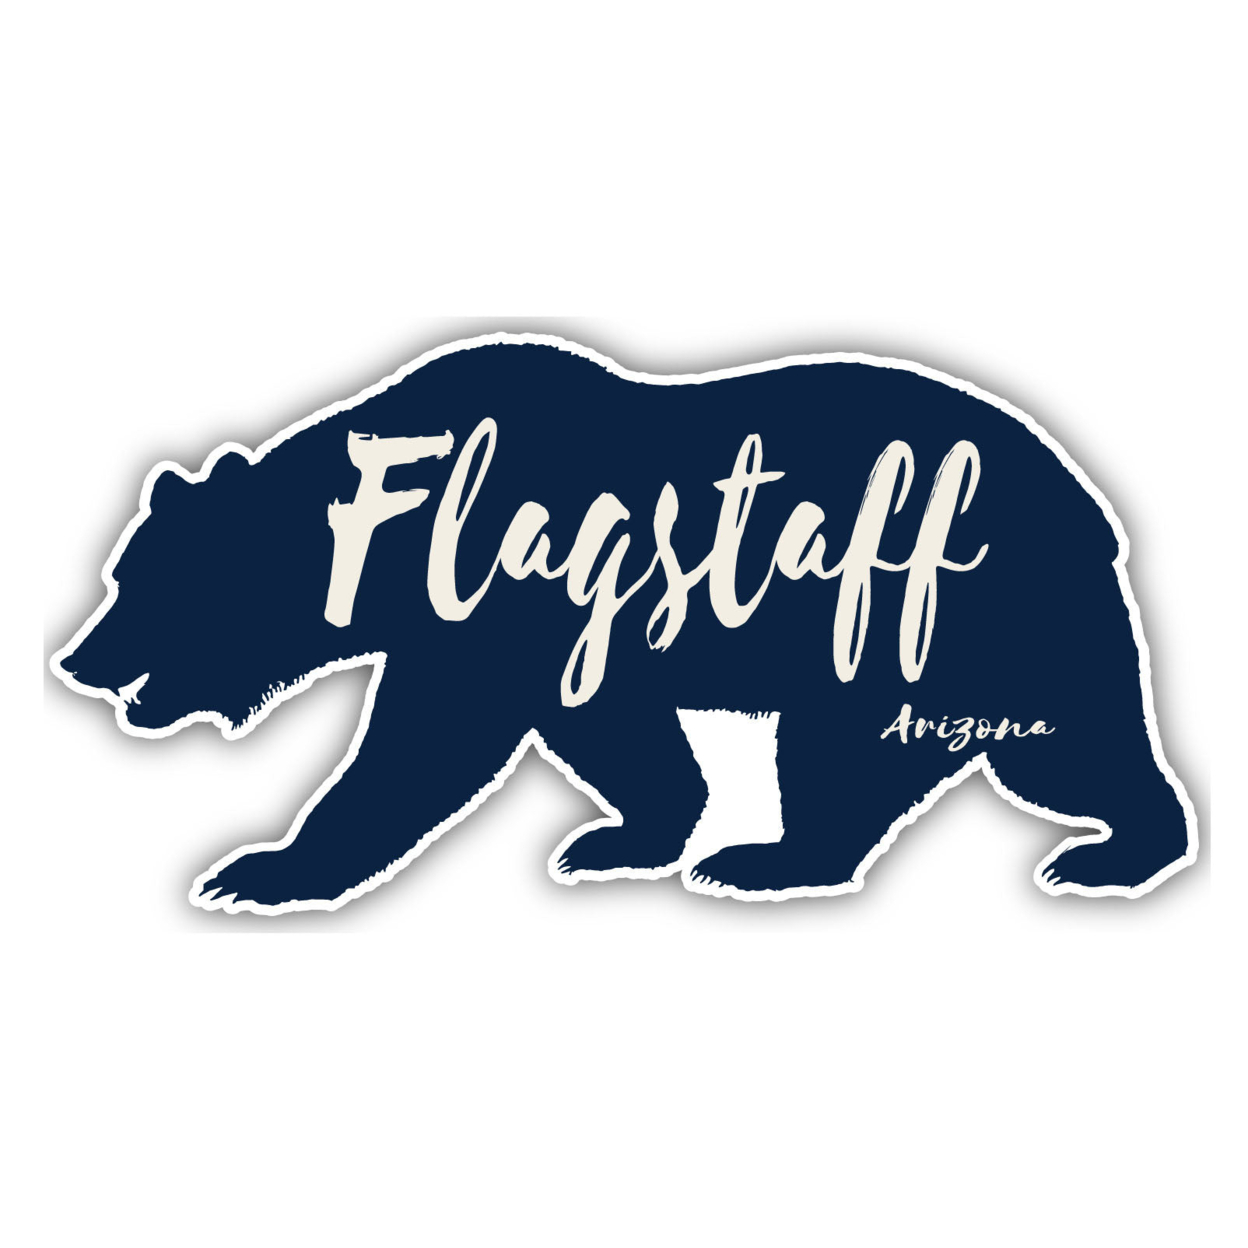 Flagstaff Arizona Souvenir Decorative Stickers (Choose Theme And Size) - 4-Pack, 4-Inch, Tent